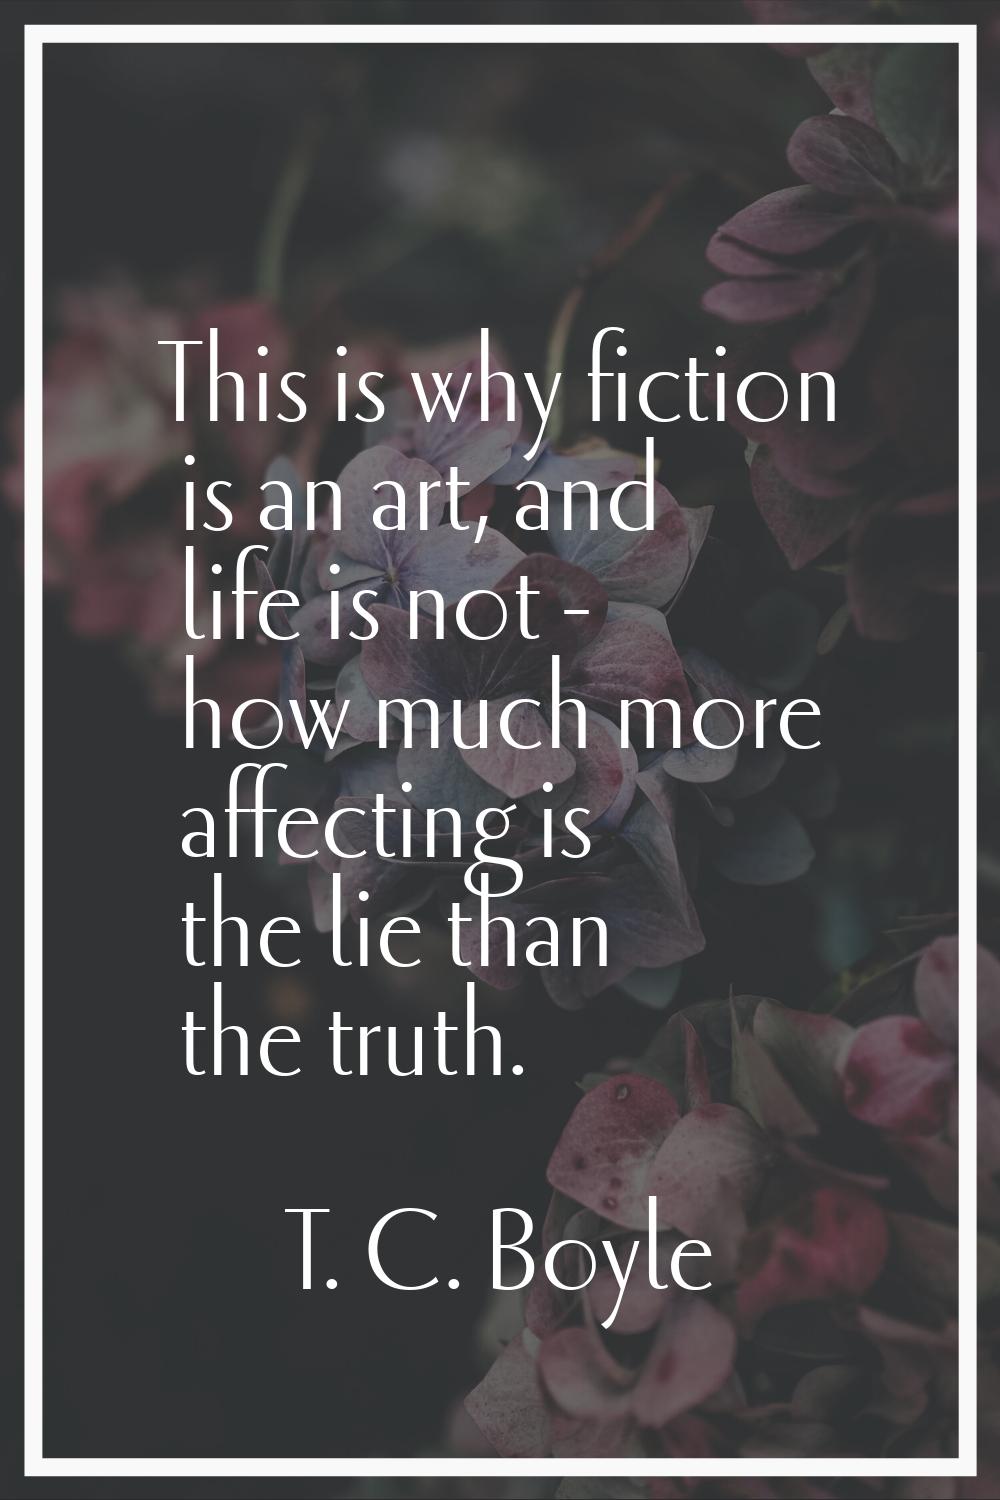 This is why fiction is an art, and life is not - how much more affecting is the lie than the truth.